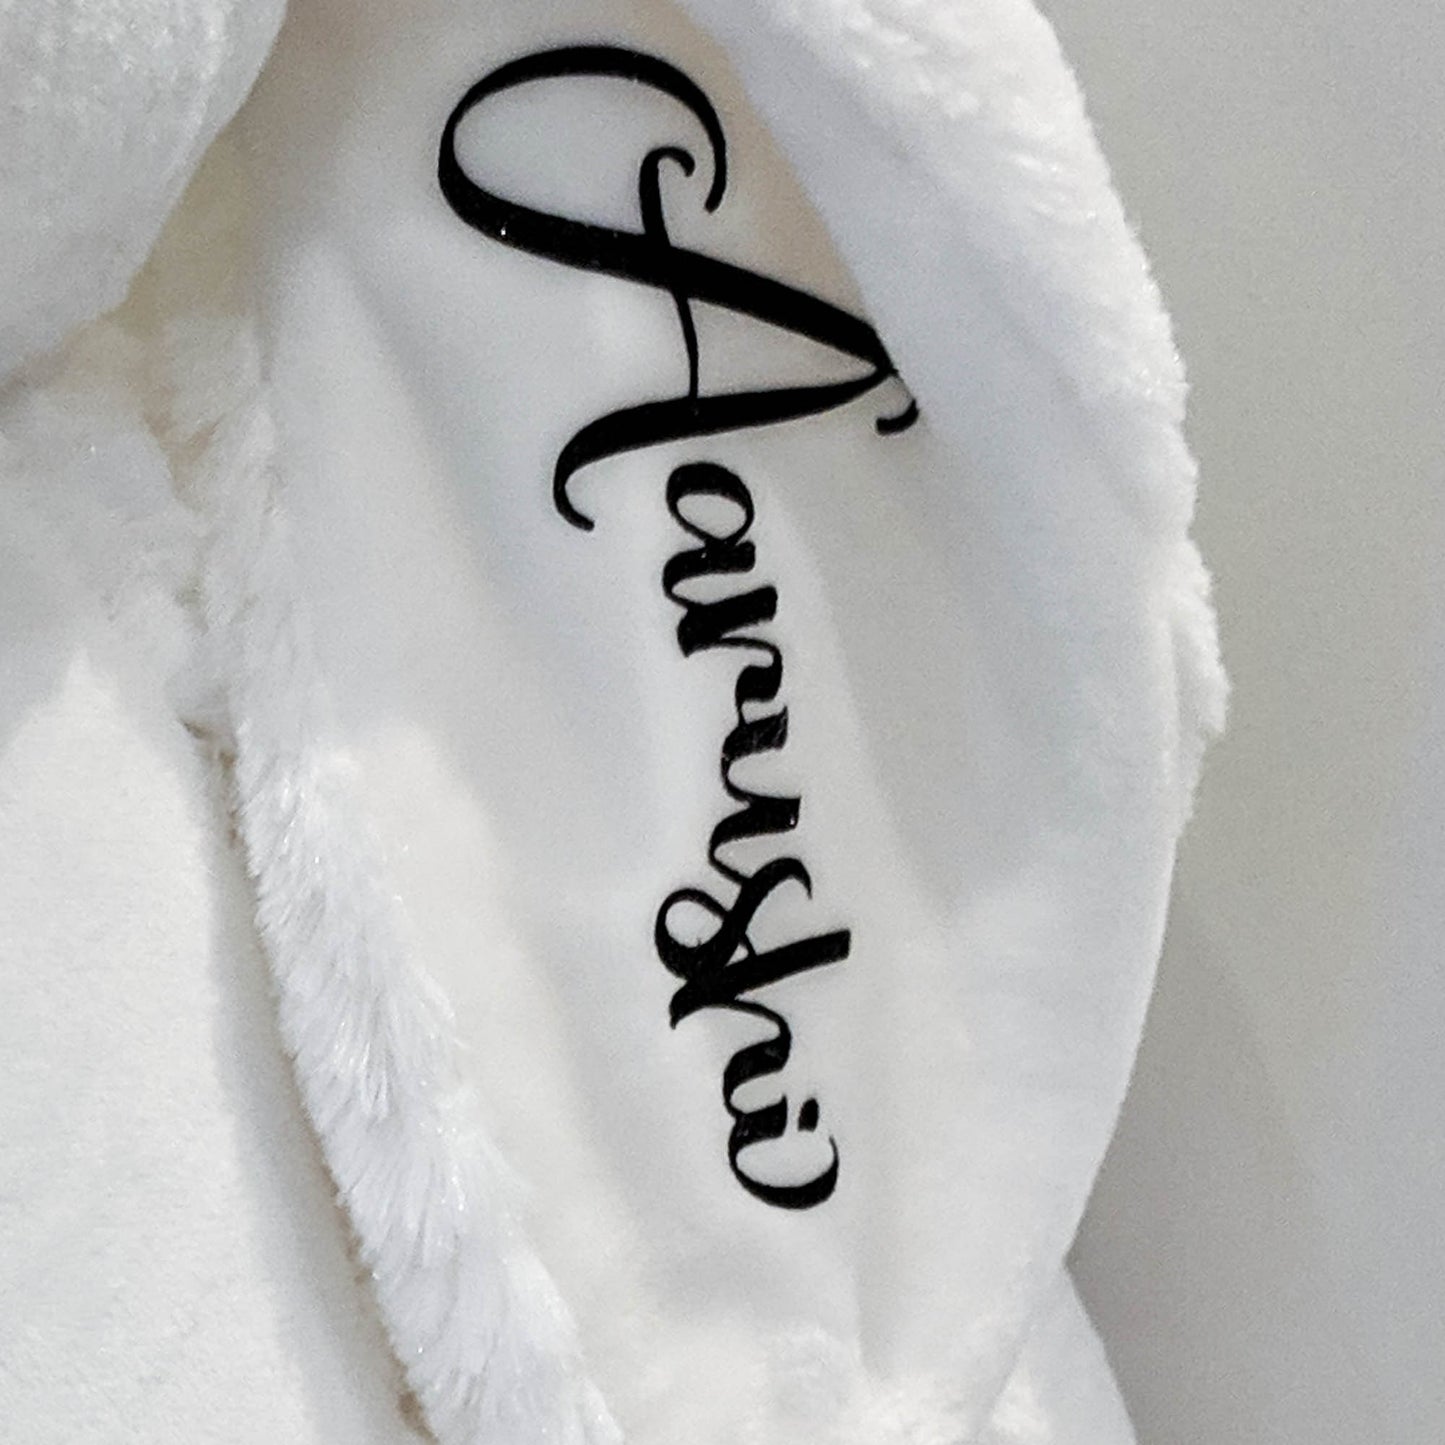 Personalised Bunny Soft Toy - Teddy